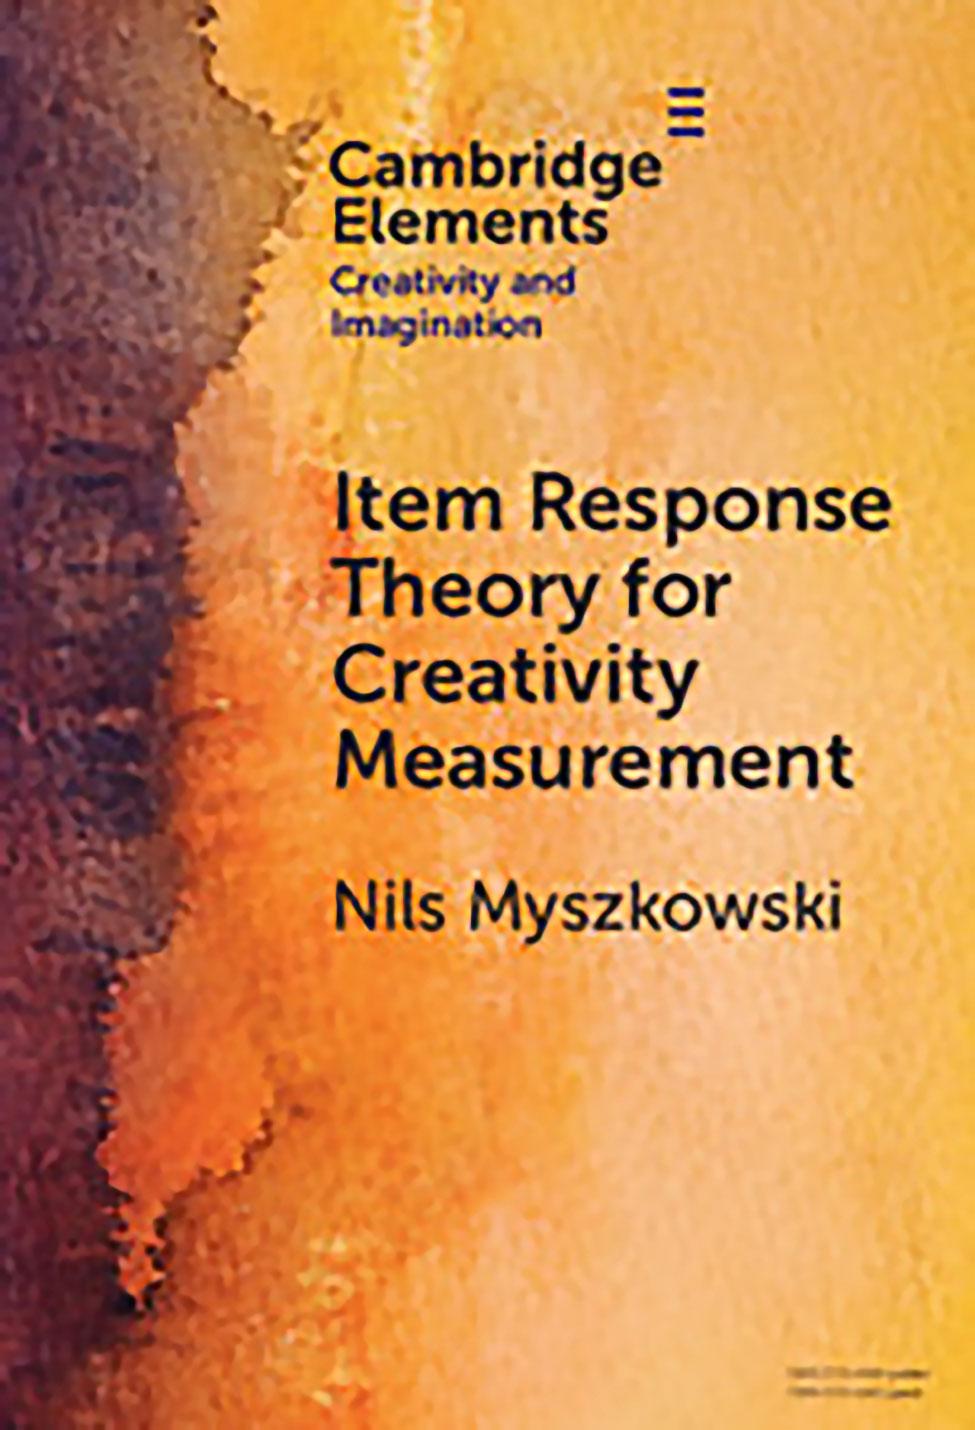 Book cover of Item Response Theory for Creativity Measurement by Pace University's Psychology professor, Nils Myszkowski, PhD